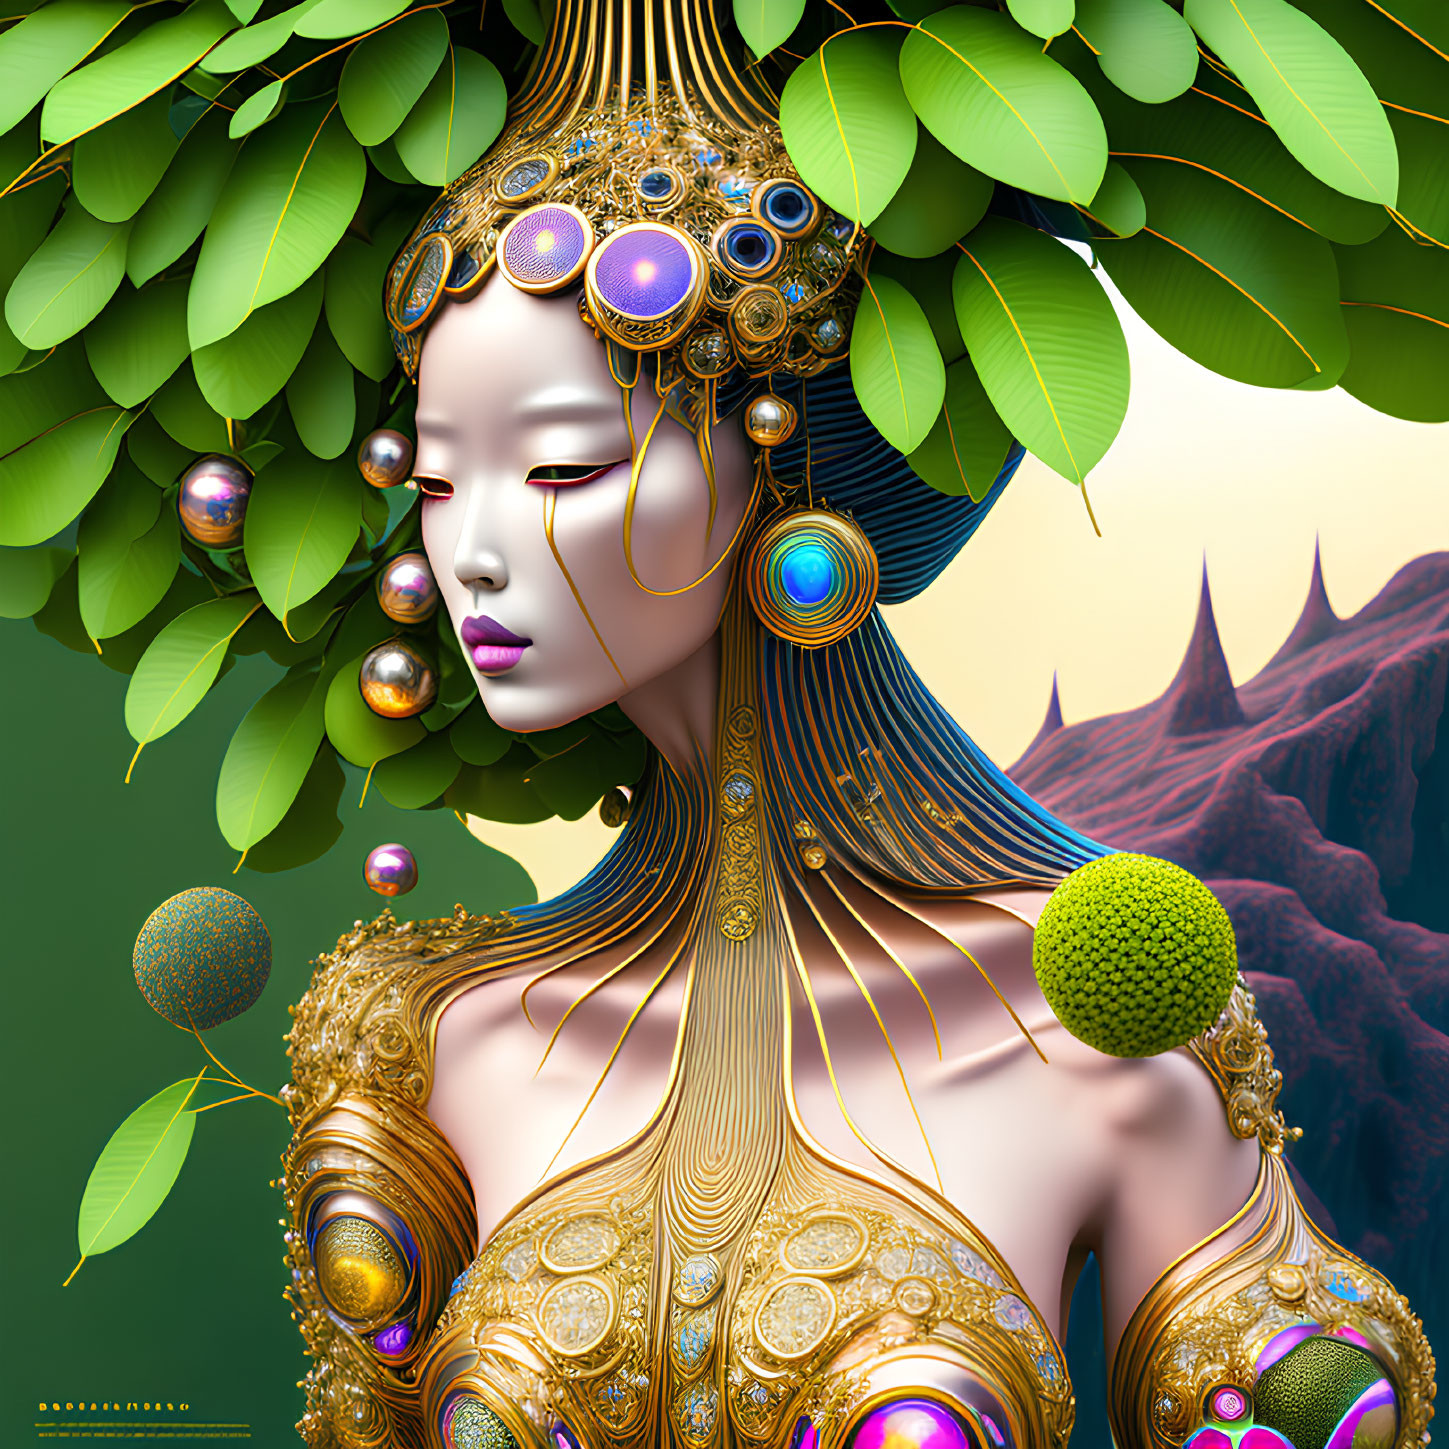 Detailed illustration of stylized female figure with golden headdress and intricate jewelry against mountainous backdrop.